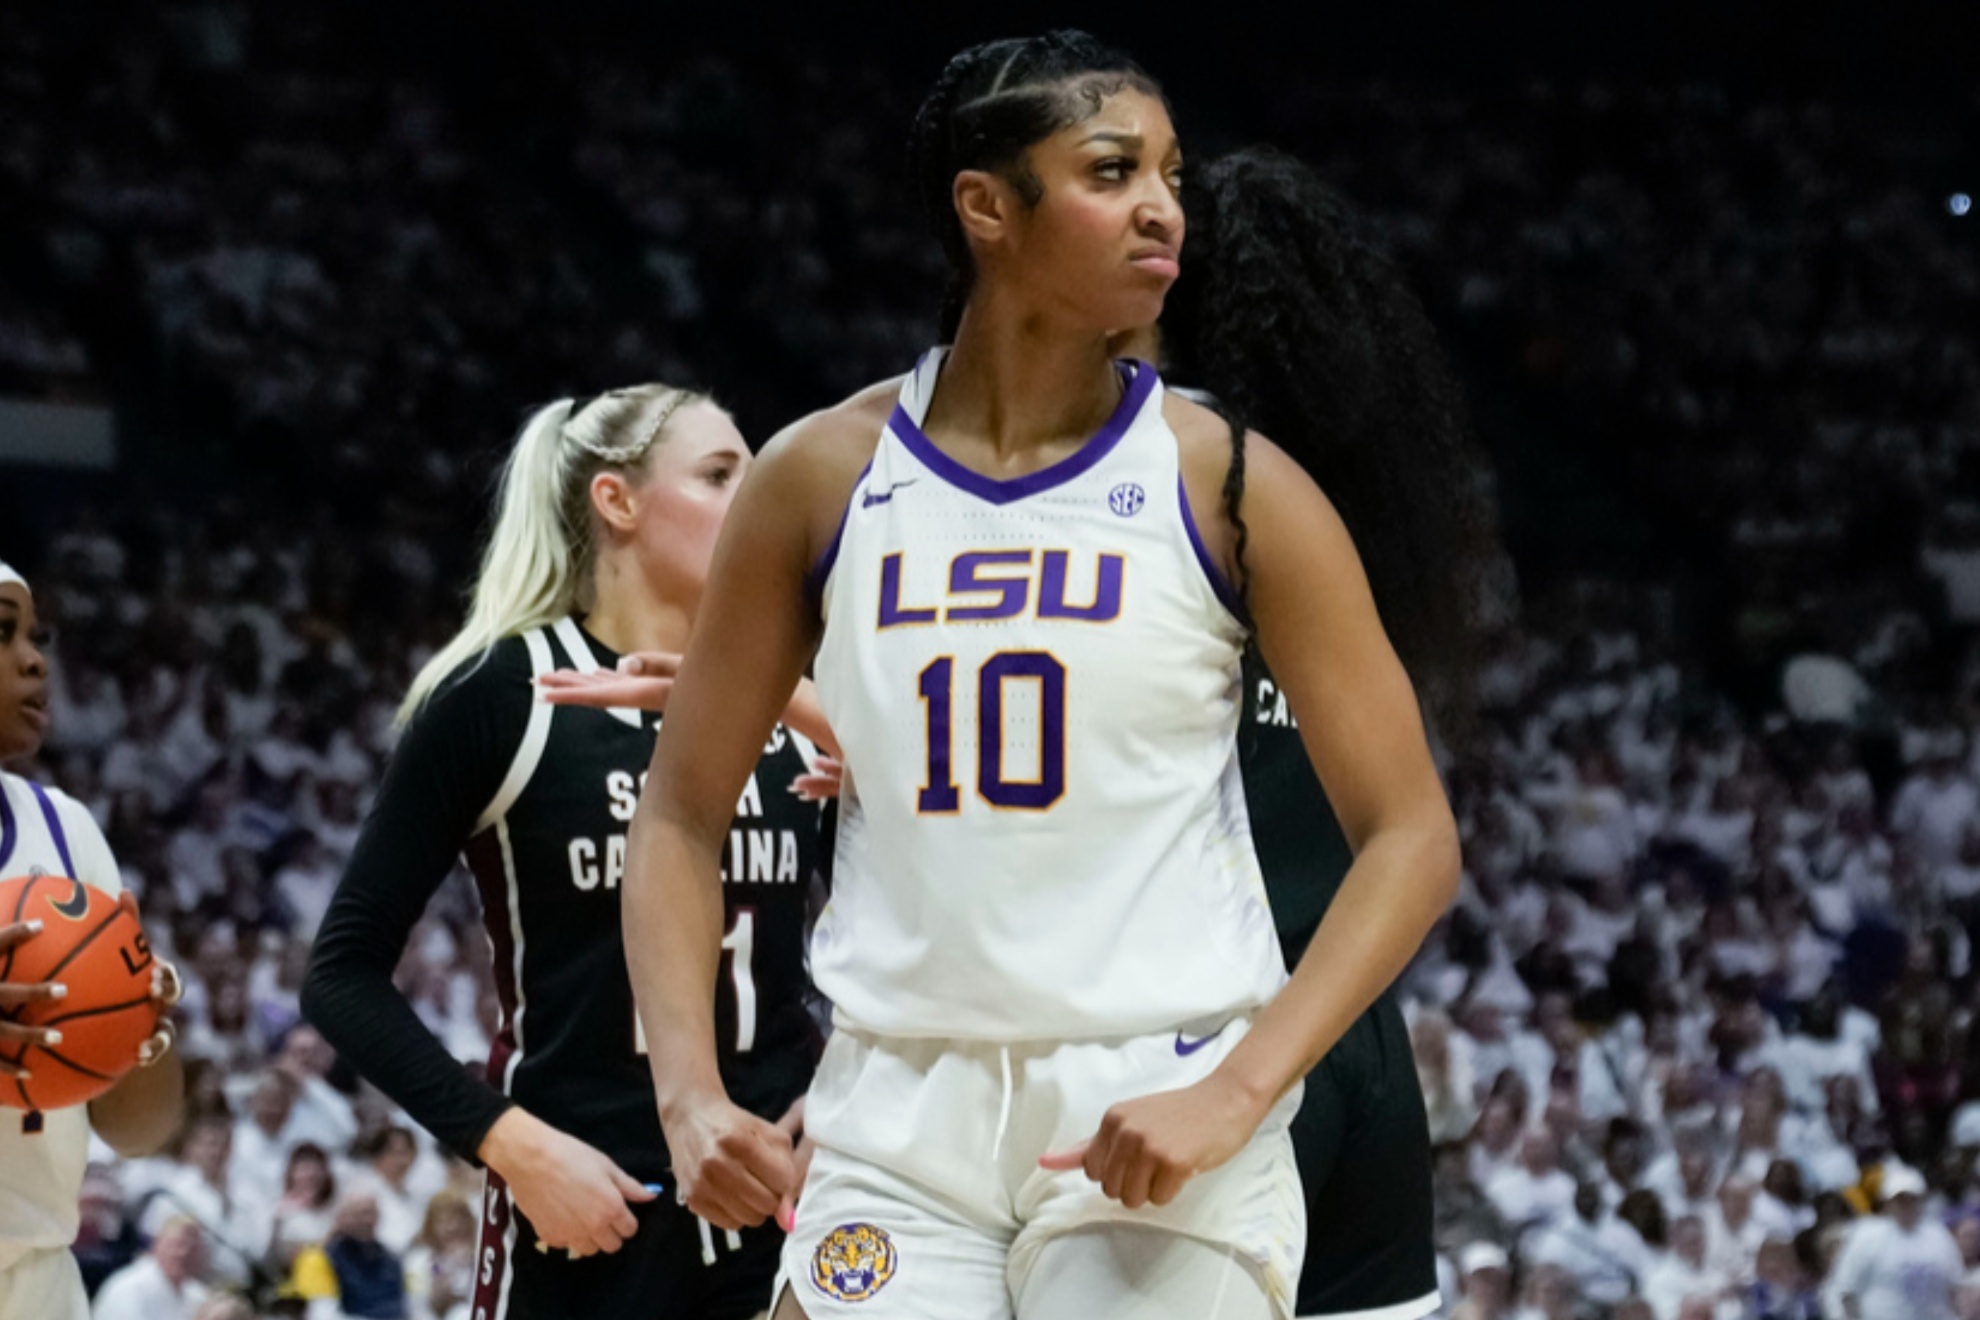 angel reese pays tribute to a'ja wilson's empowering legacy as she receives new sec honor